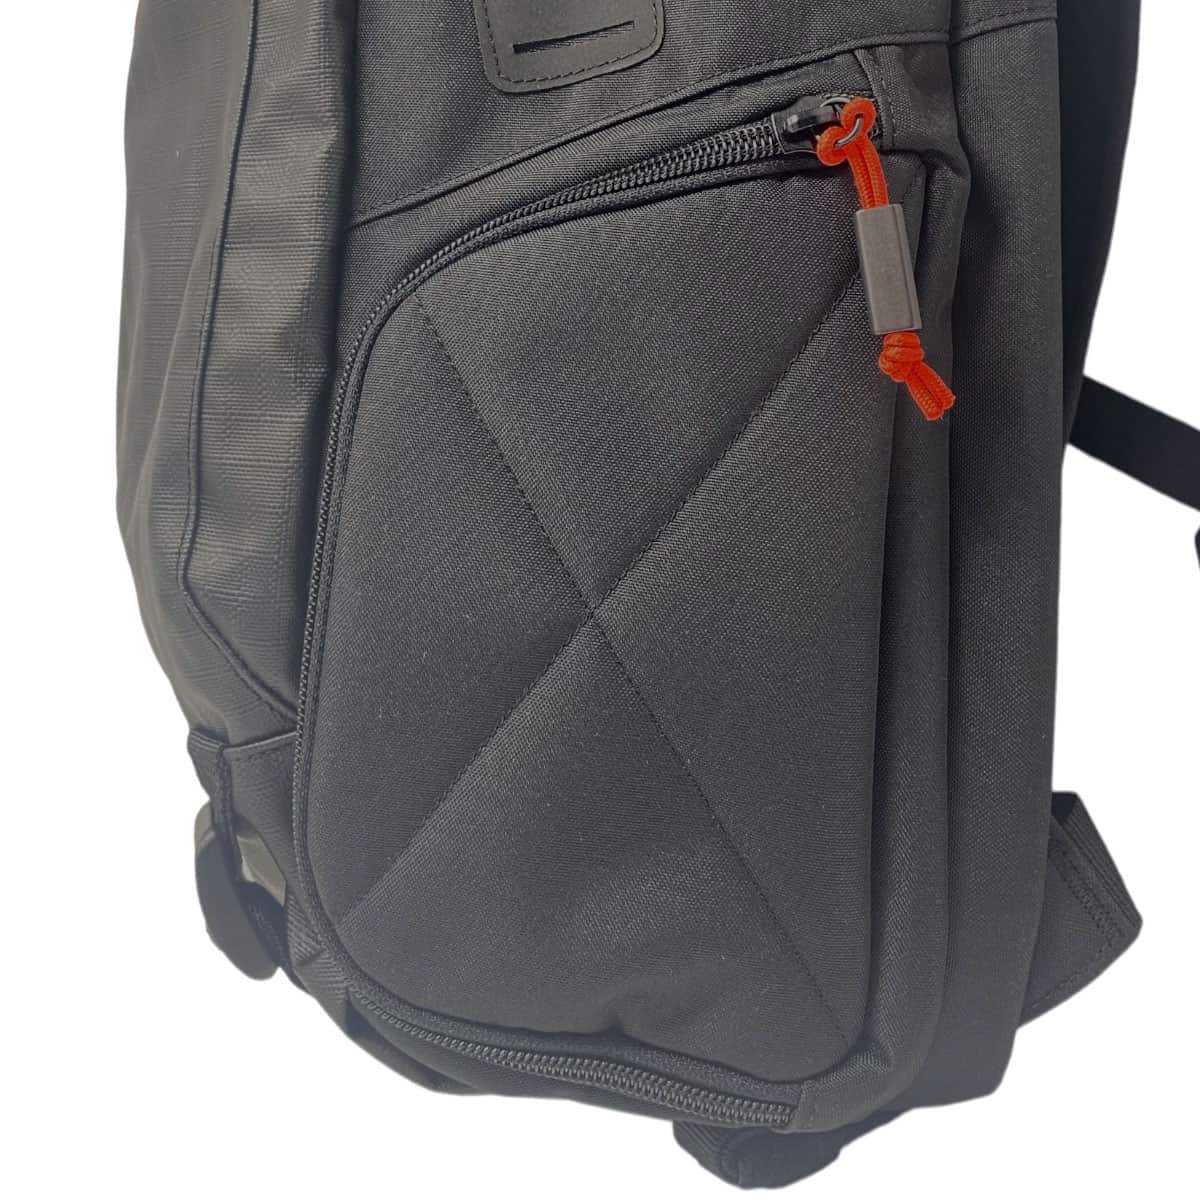 The Dainese D-Throttle Riding Backpack is a reliable and versatile choice designed for everyday use - side pocket